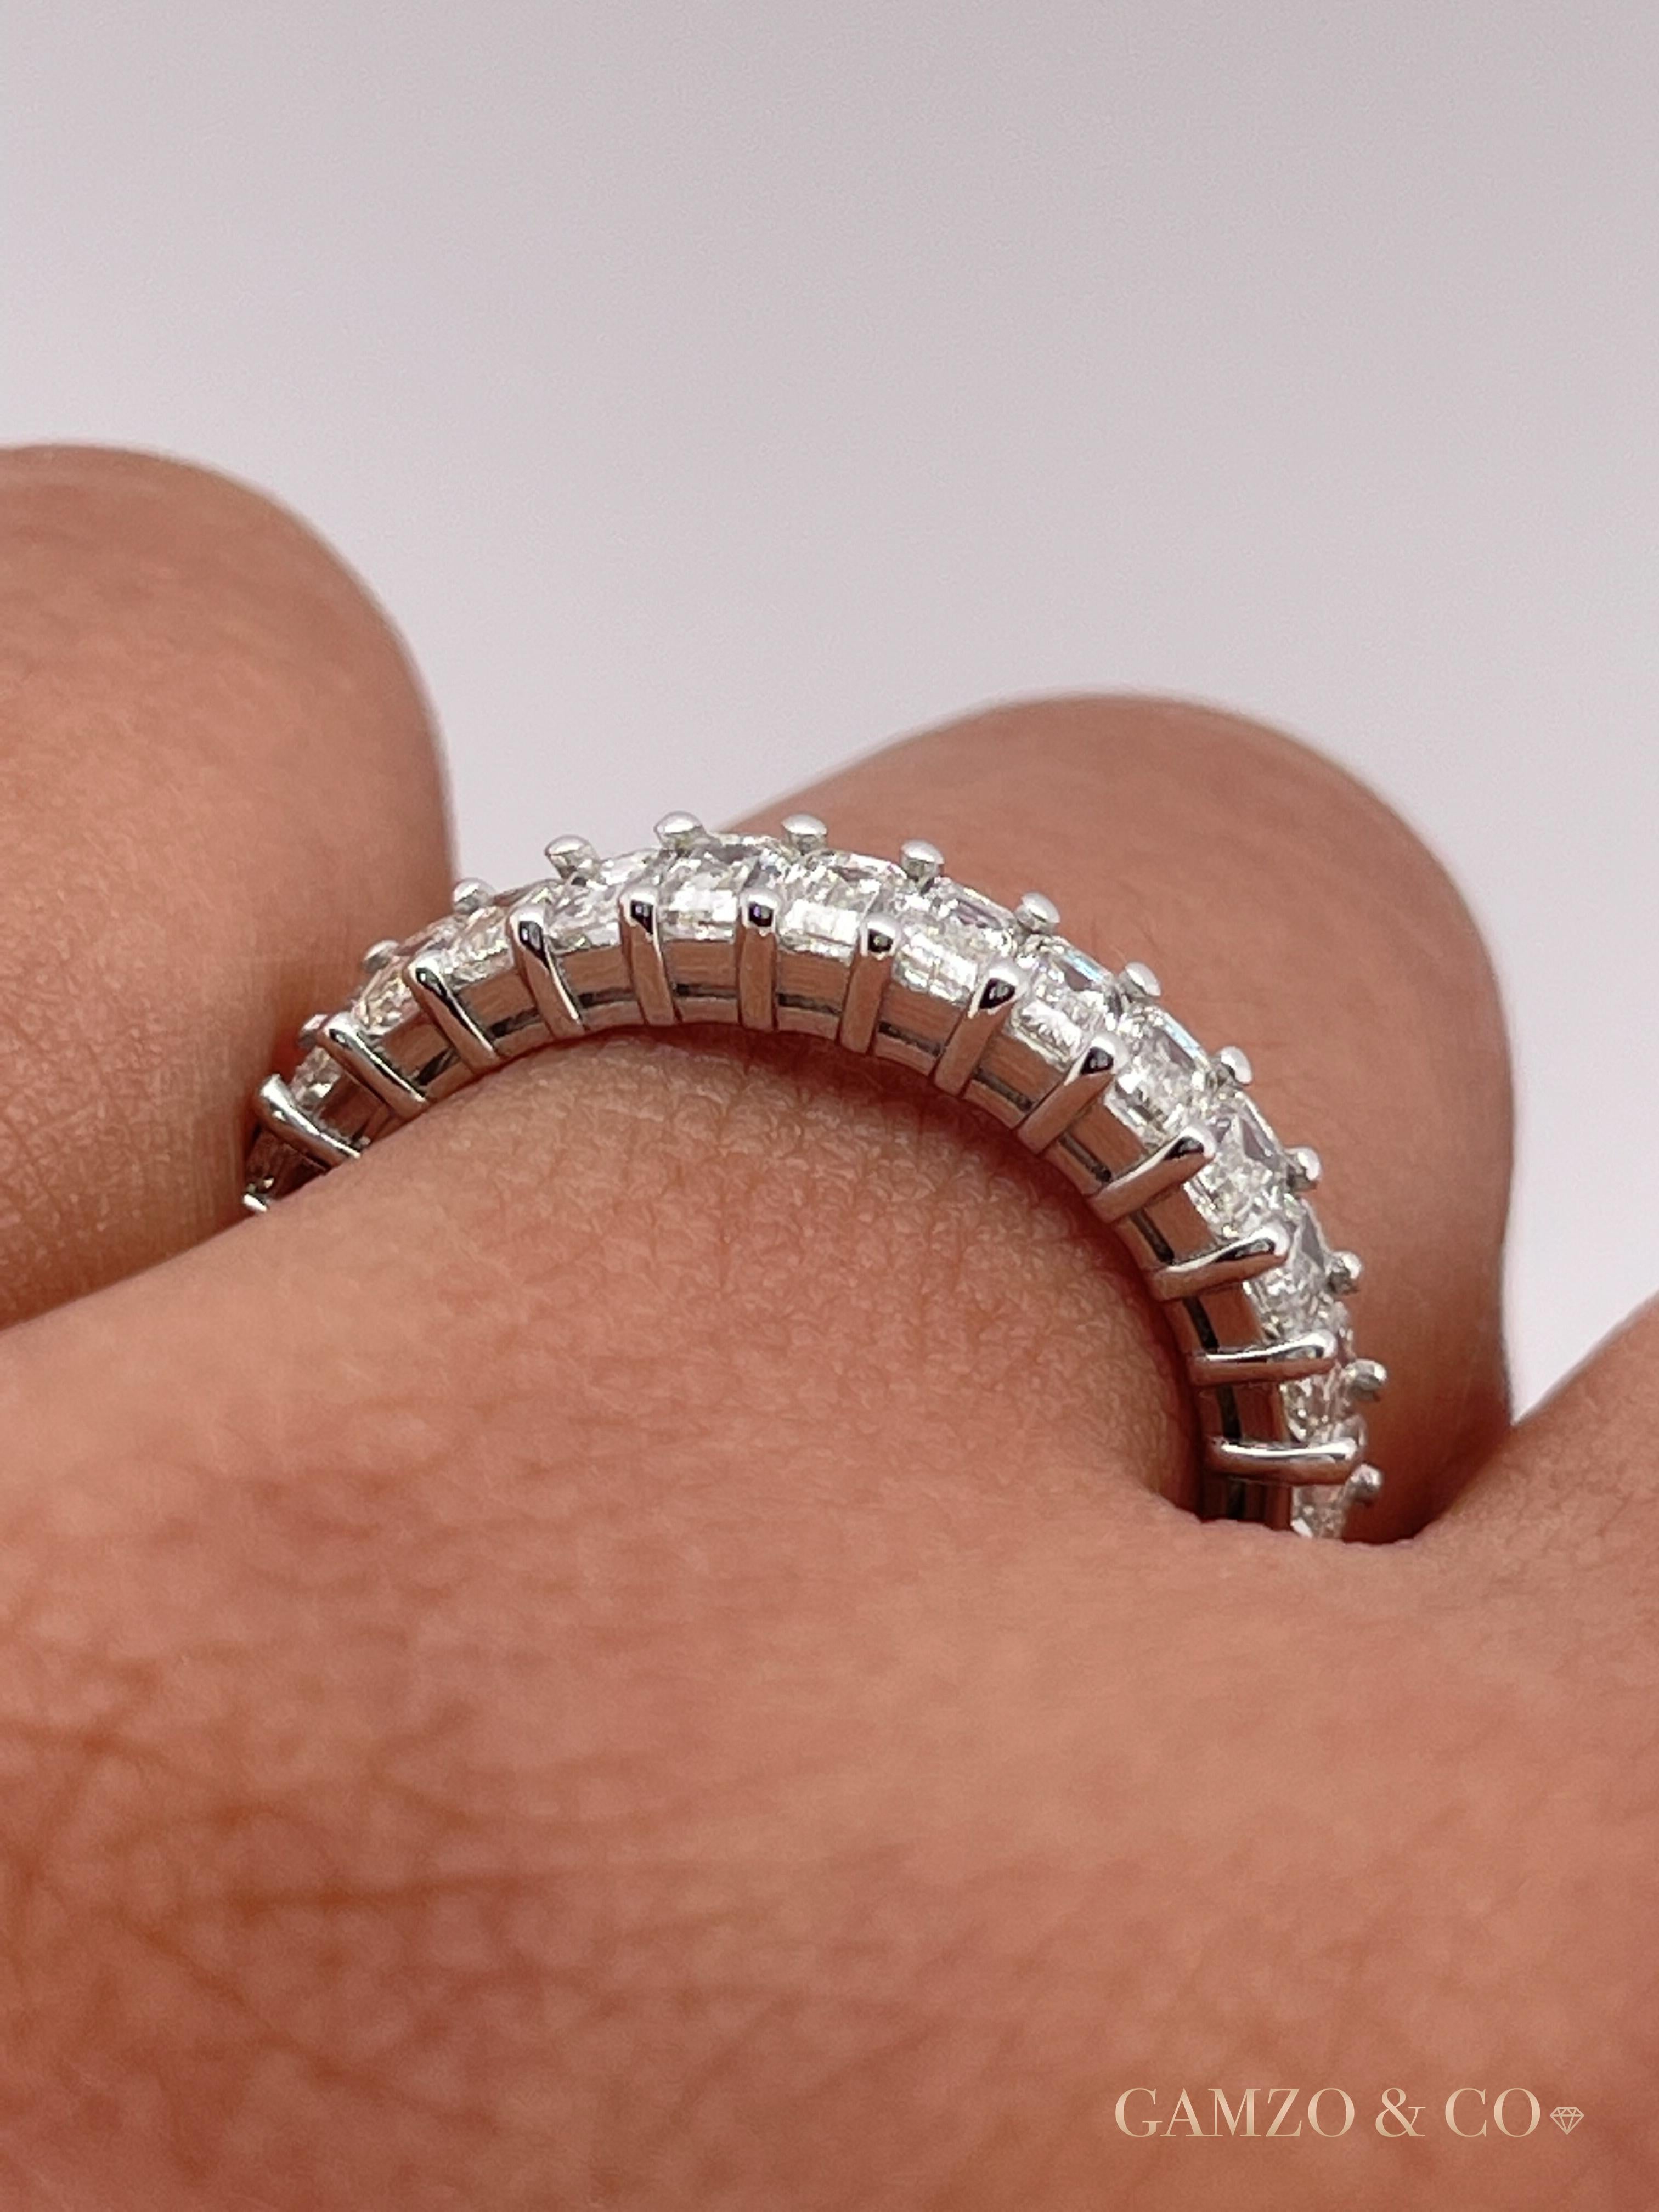 For Sale:  18k White Gold 3 Carat Emerald Cut Natural Diamond Eternity Ring 3